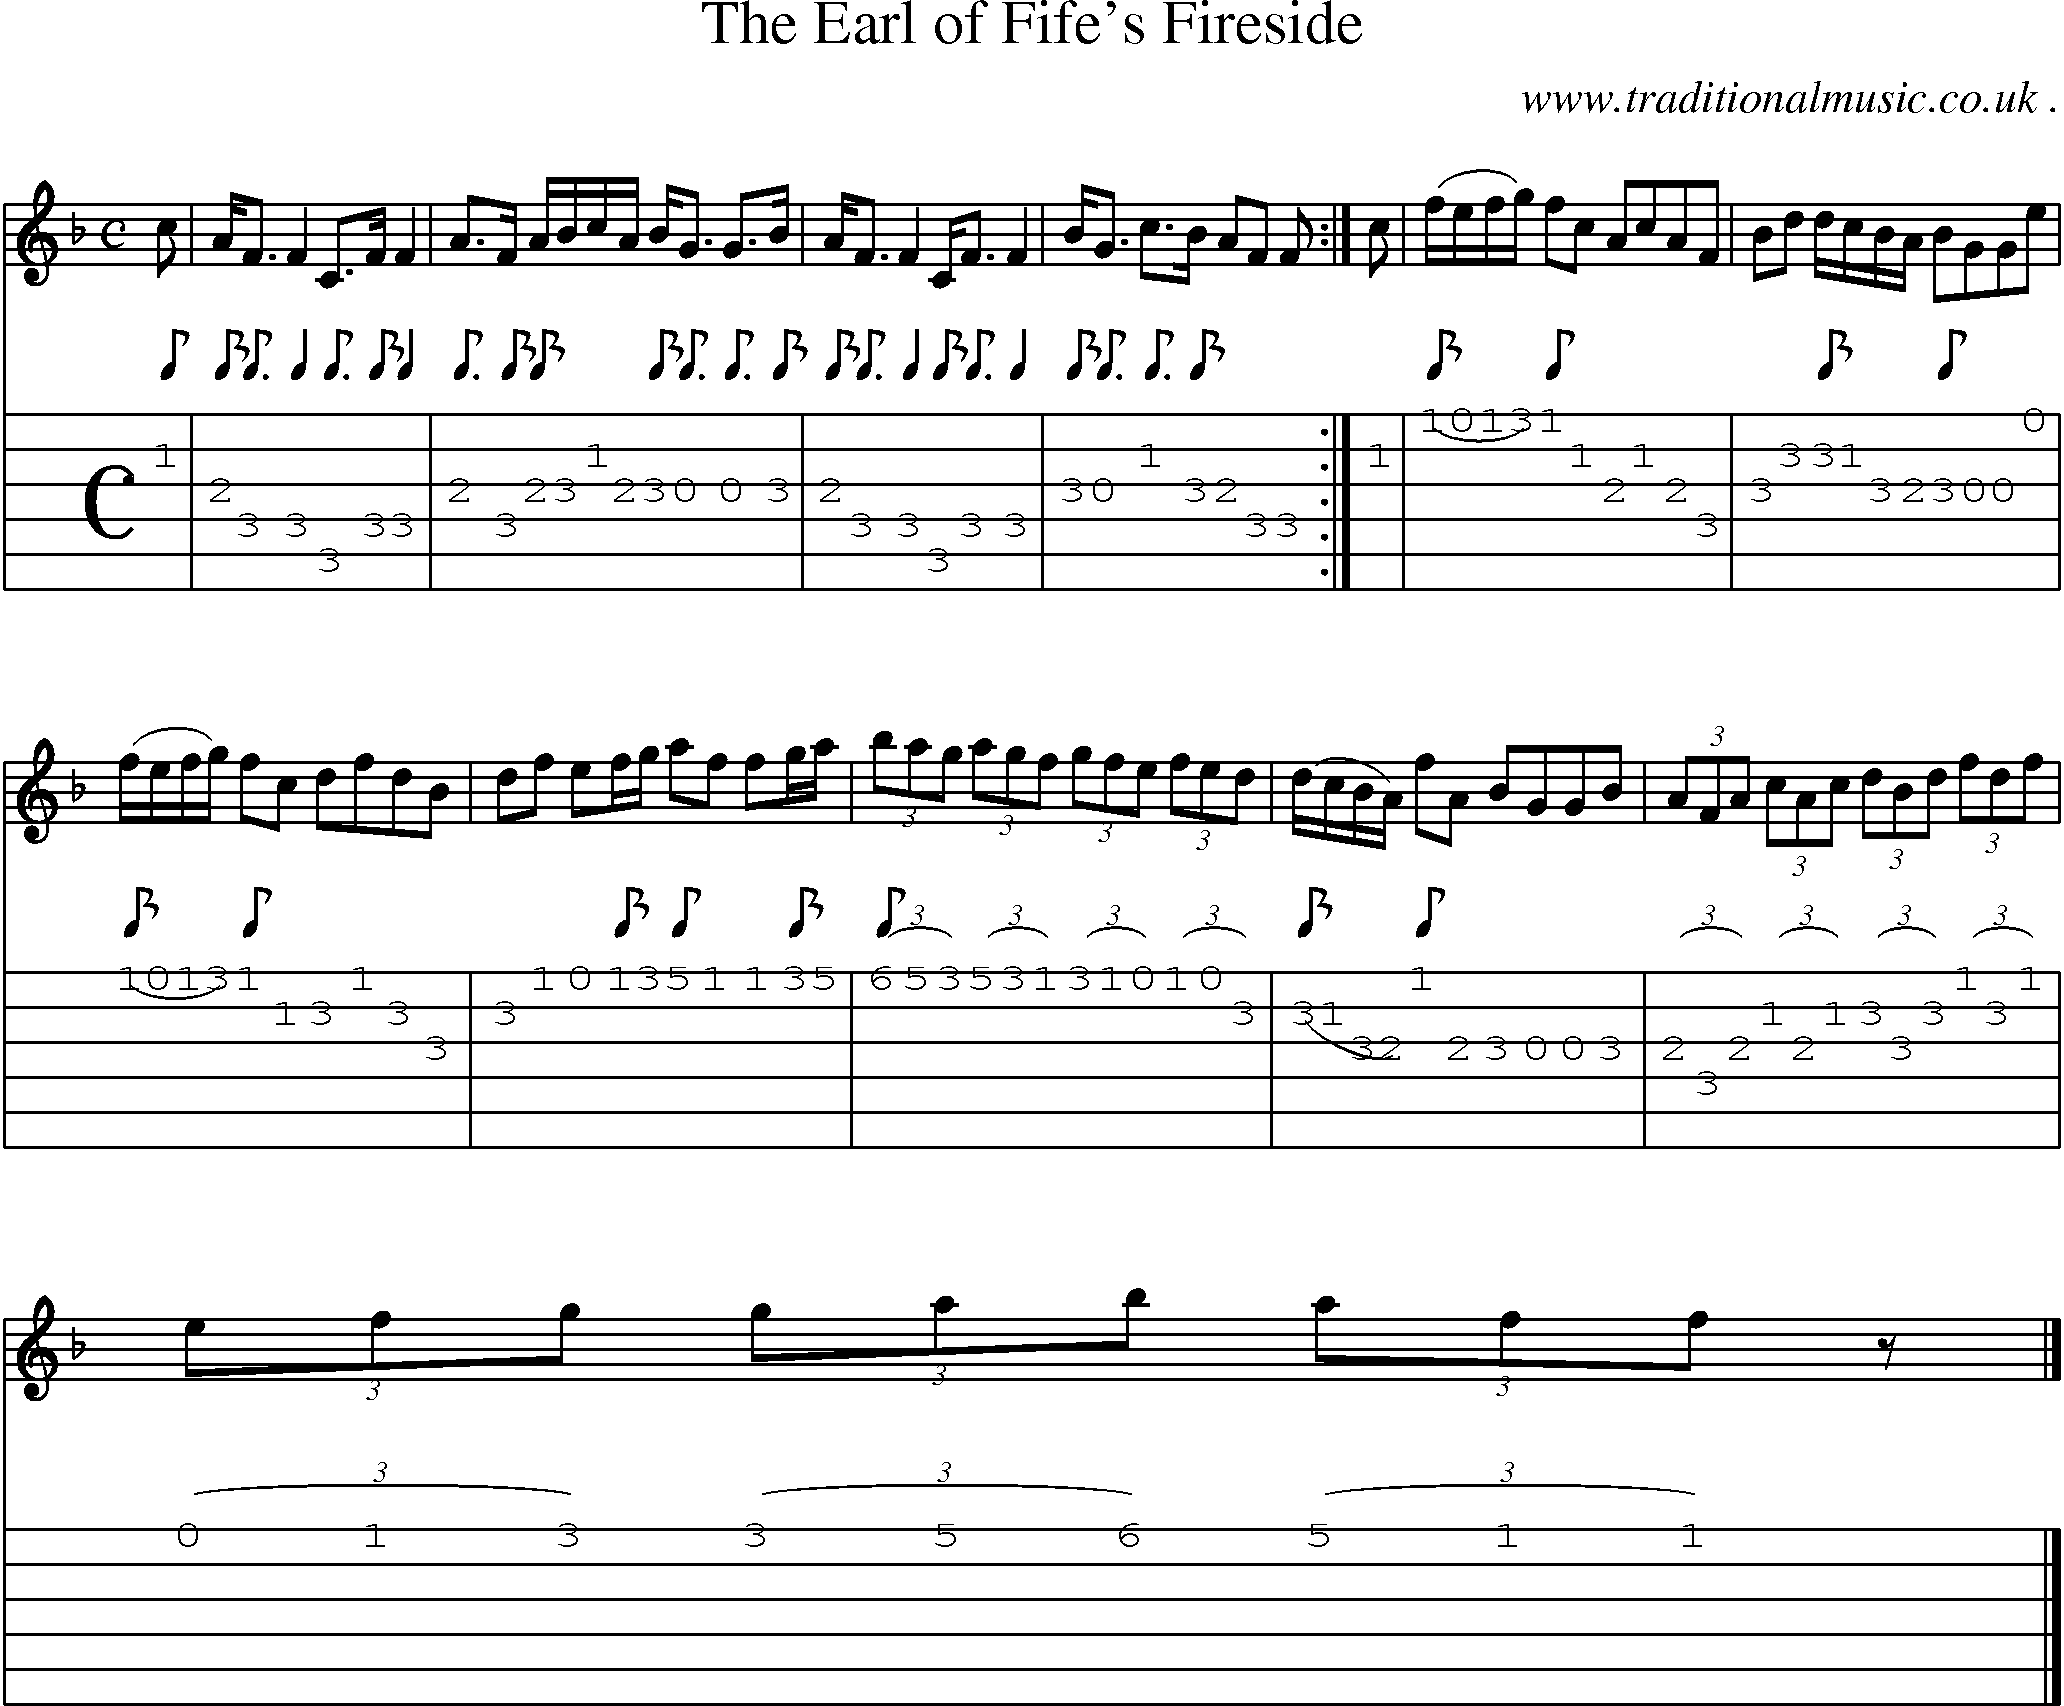 Sheet-music  score, Chords and Guitar Tabs for The Earl Of Fifes Fireside